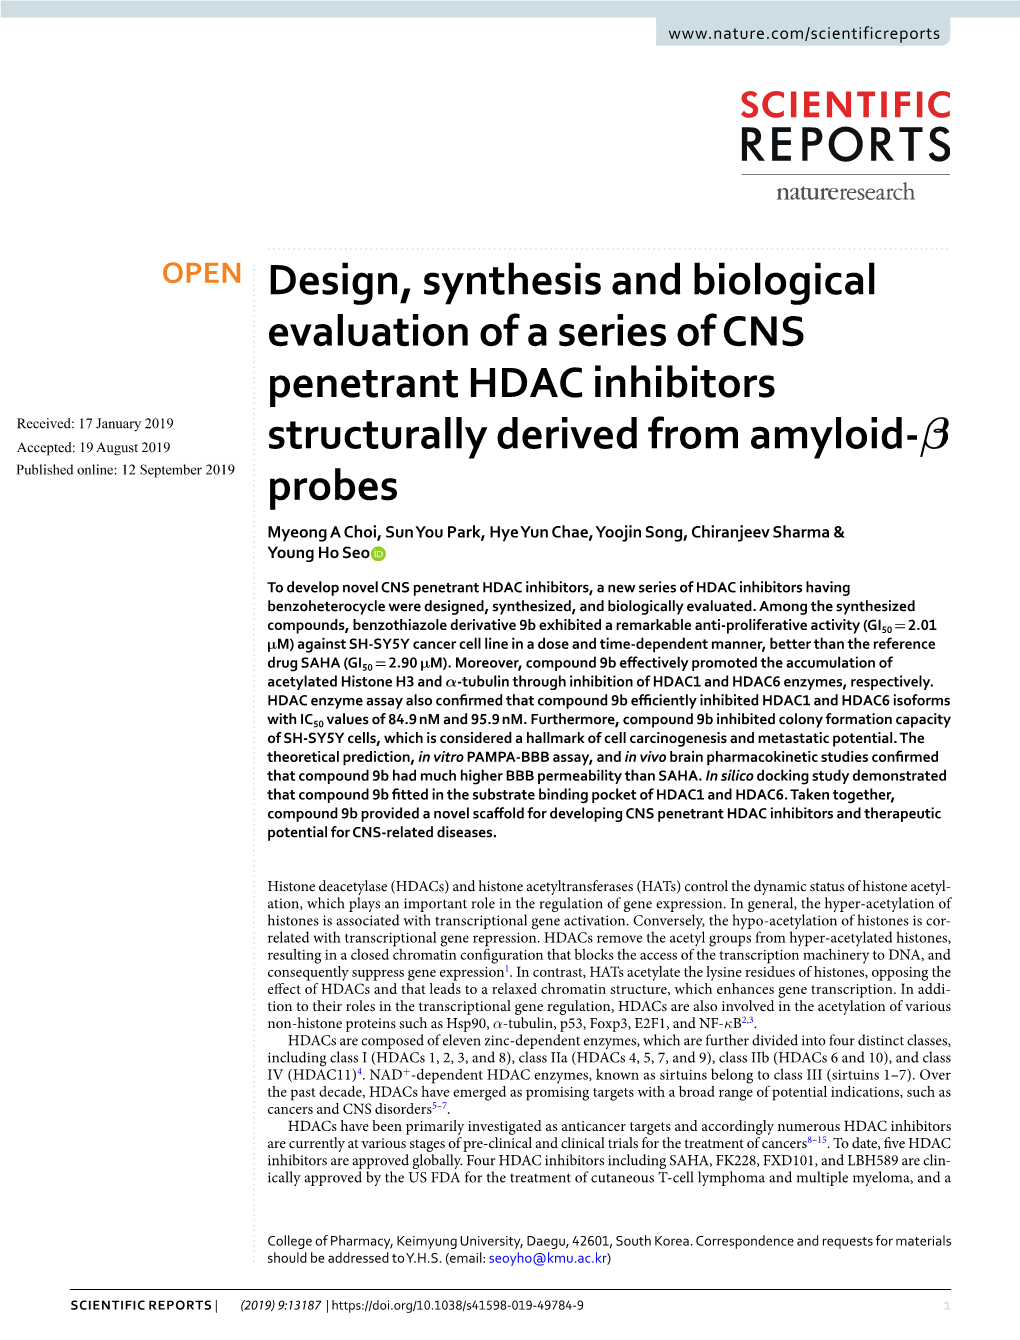 Design, Synthesis and Biological Evaluation of a Series of CNS